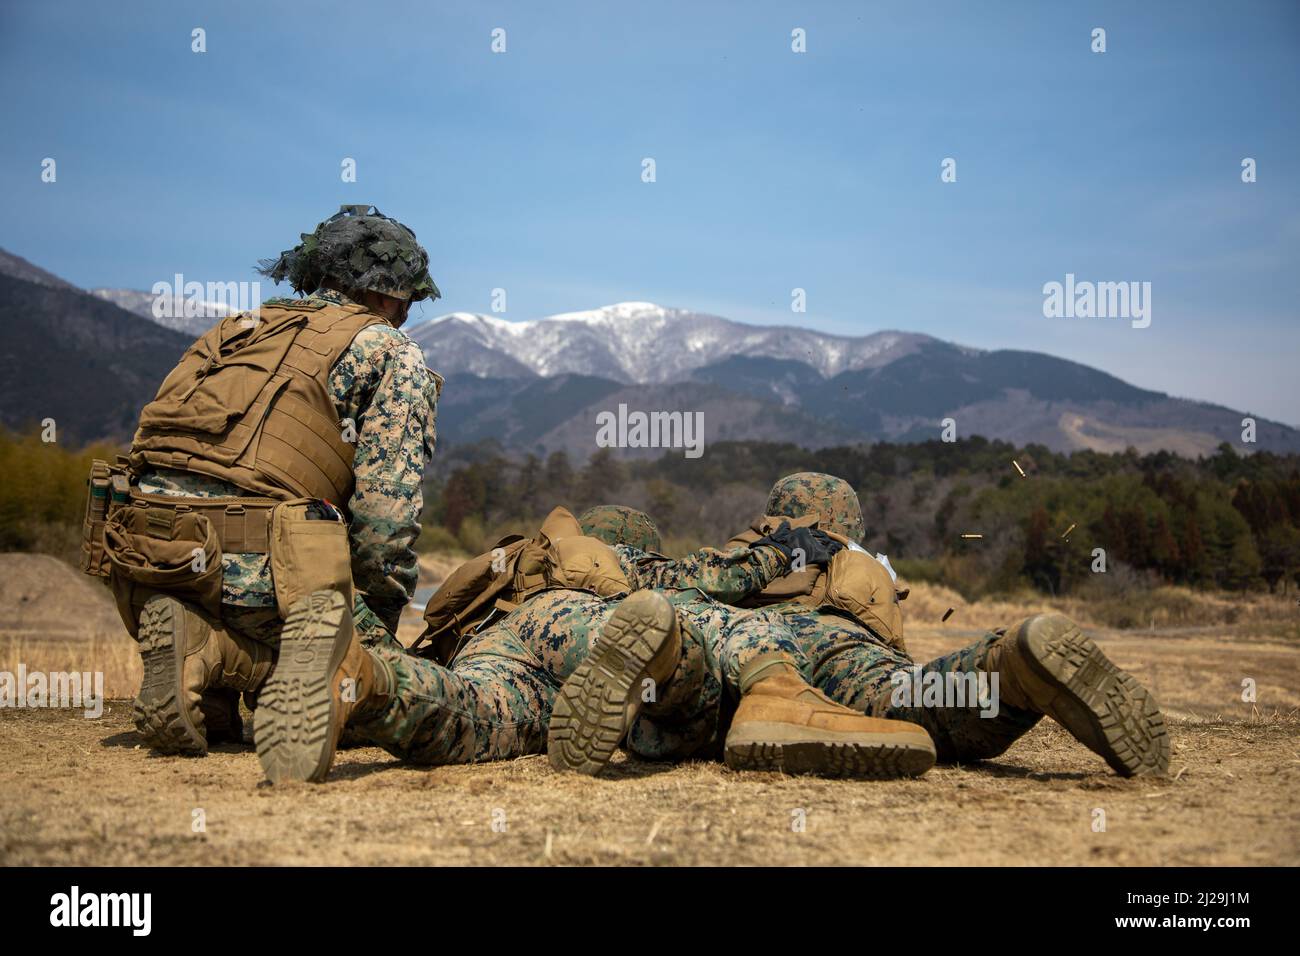 U.S. Marine Corps Sgt. Troy Williams, a semitrailer refueler operator with Marine Wing Support Squadron (MWSS) 171, oversees Marines shooting an M249 light machine gun at Japan Ground Self-Defense Force Camp Nihonbara, Japan, March 10, 2022. Marines and Sailors with MWSS-171 and Marine Air Control Squadron 4 participated in Exercise Tanuki Wrath 2022 to enhance their skills in setting up a forward operating base, establishing a forward arming and refueling point, and conducting live-fire weapons training.  (U.S. Marine Corps photo by Lance Cpl. Calah Thompson) Stock Photo